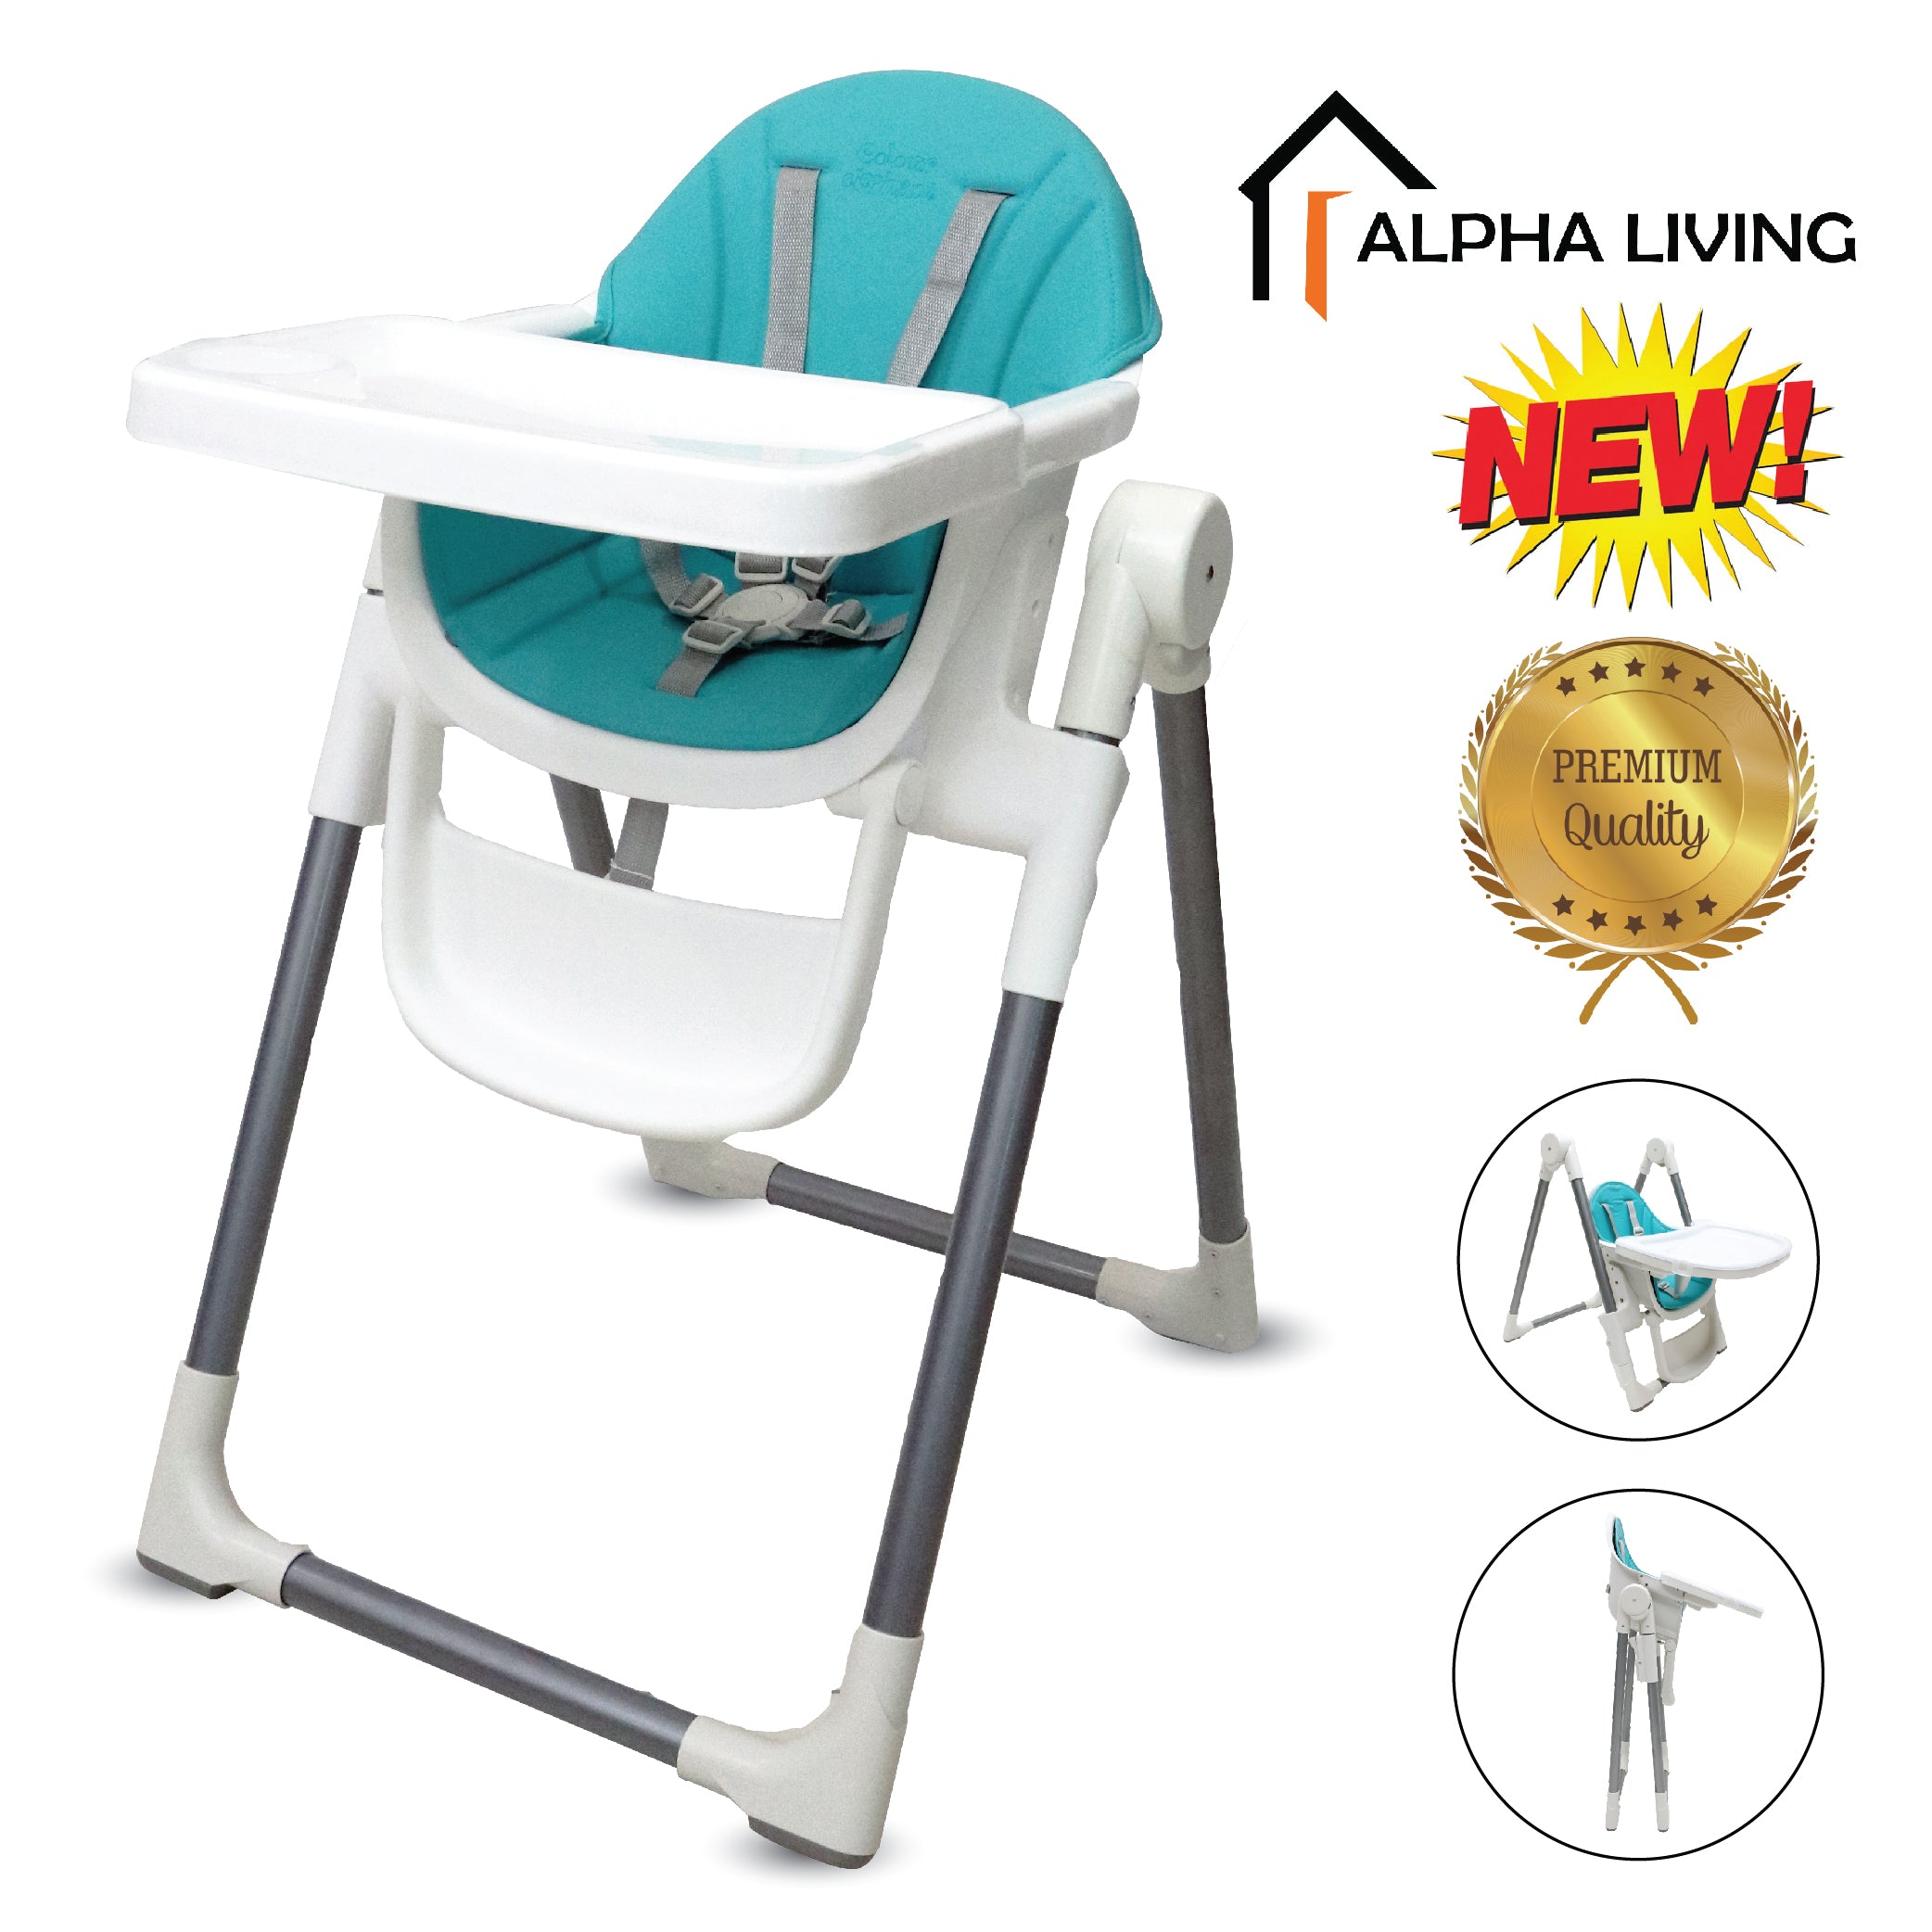 Height Adjustable, Foldable Baby Dining High Chair (BAY0224TQ)